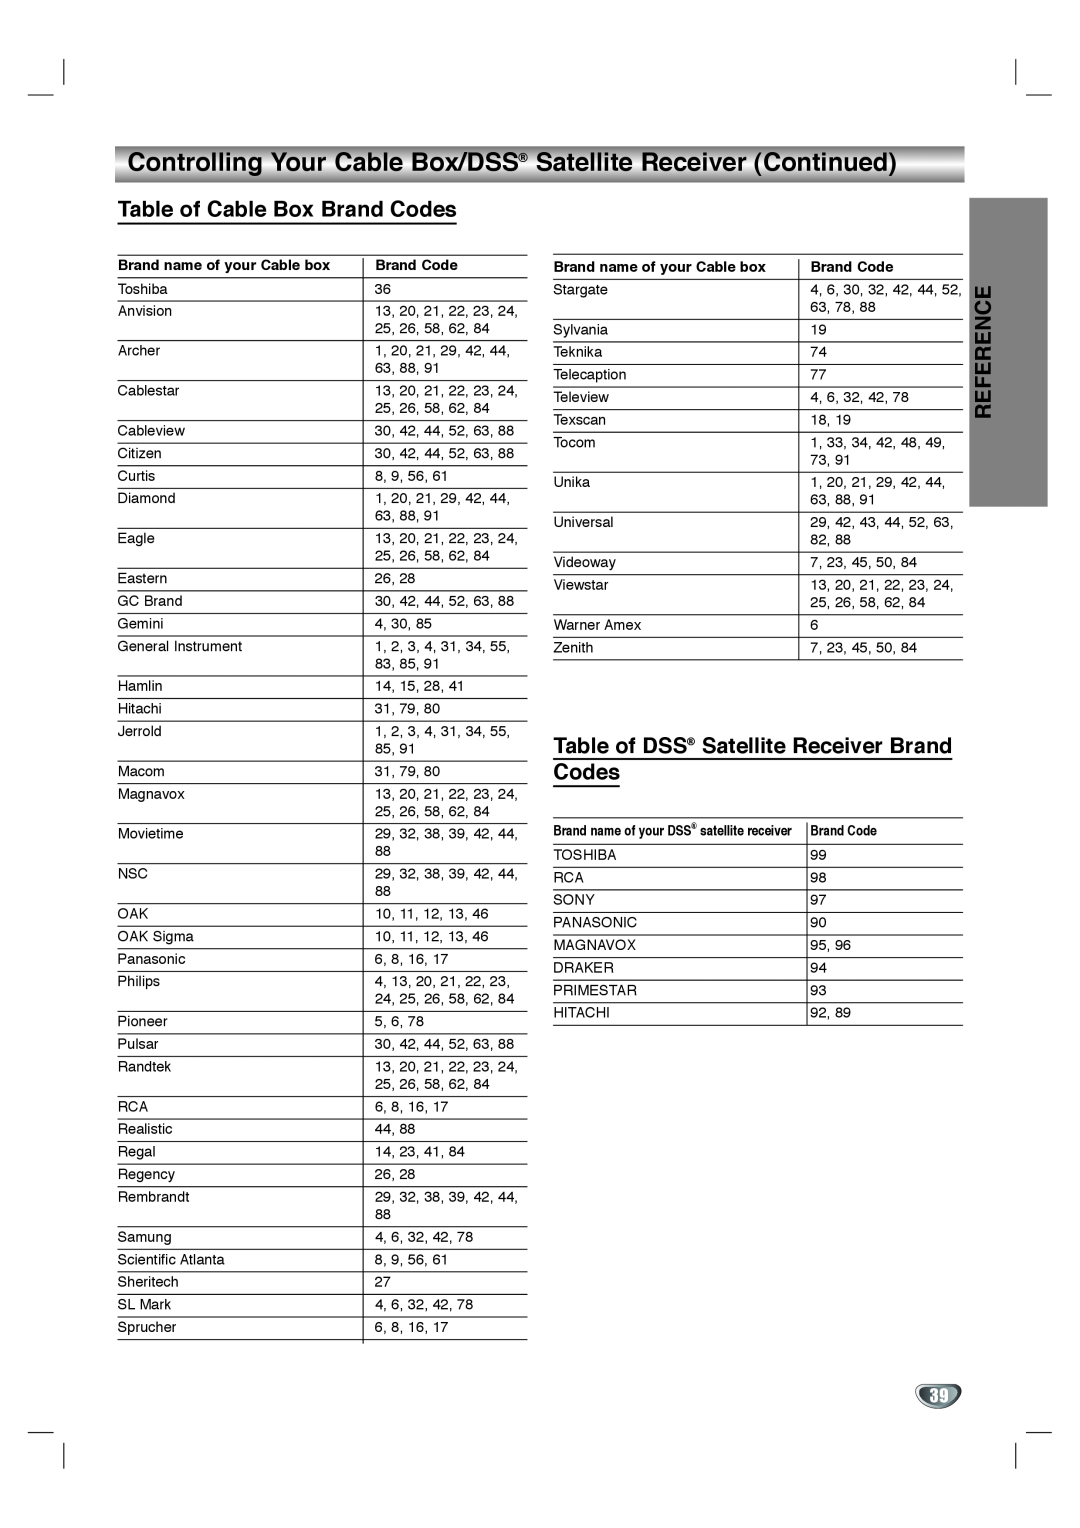 Toshiba SD-K530SU owner manual Table of Cable Box Brand Codes, Table of DSS Satellite Receiver Brand Codes 